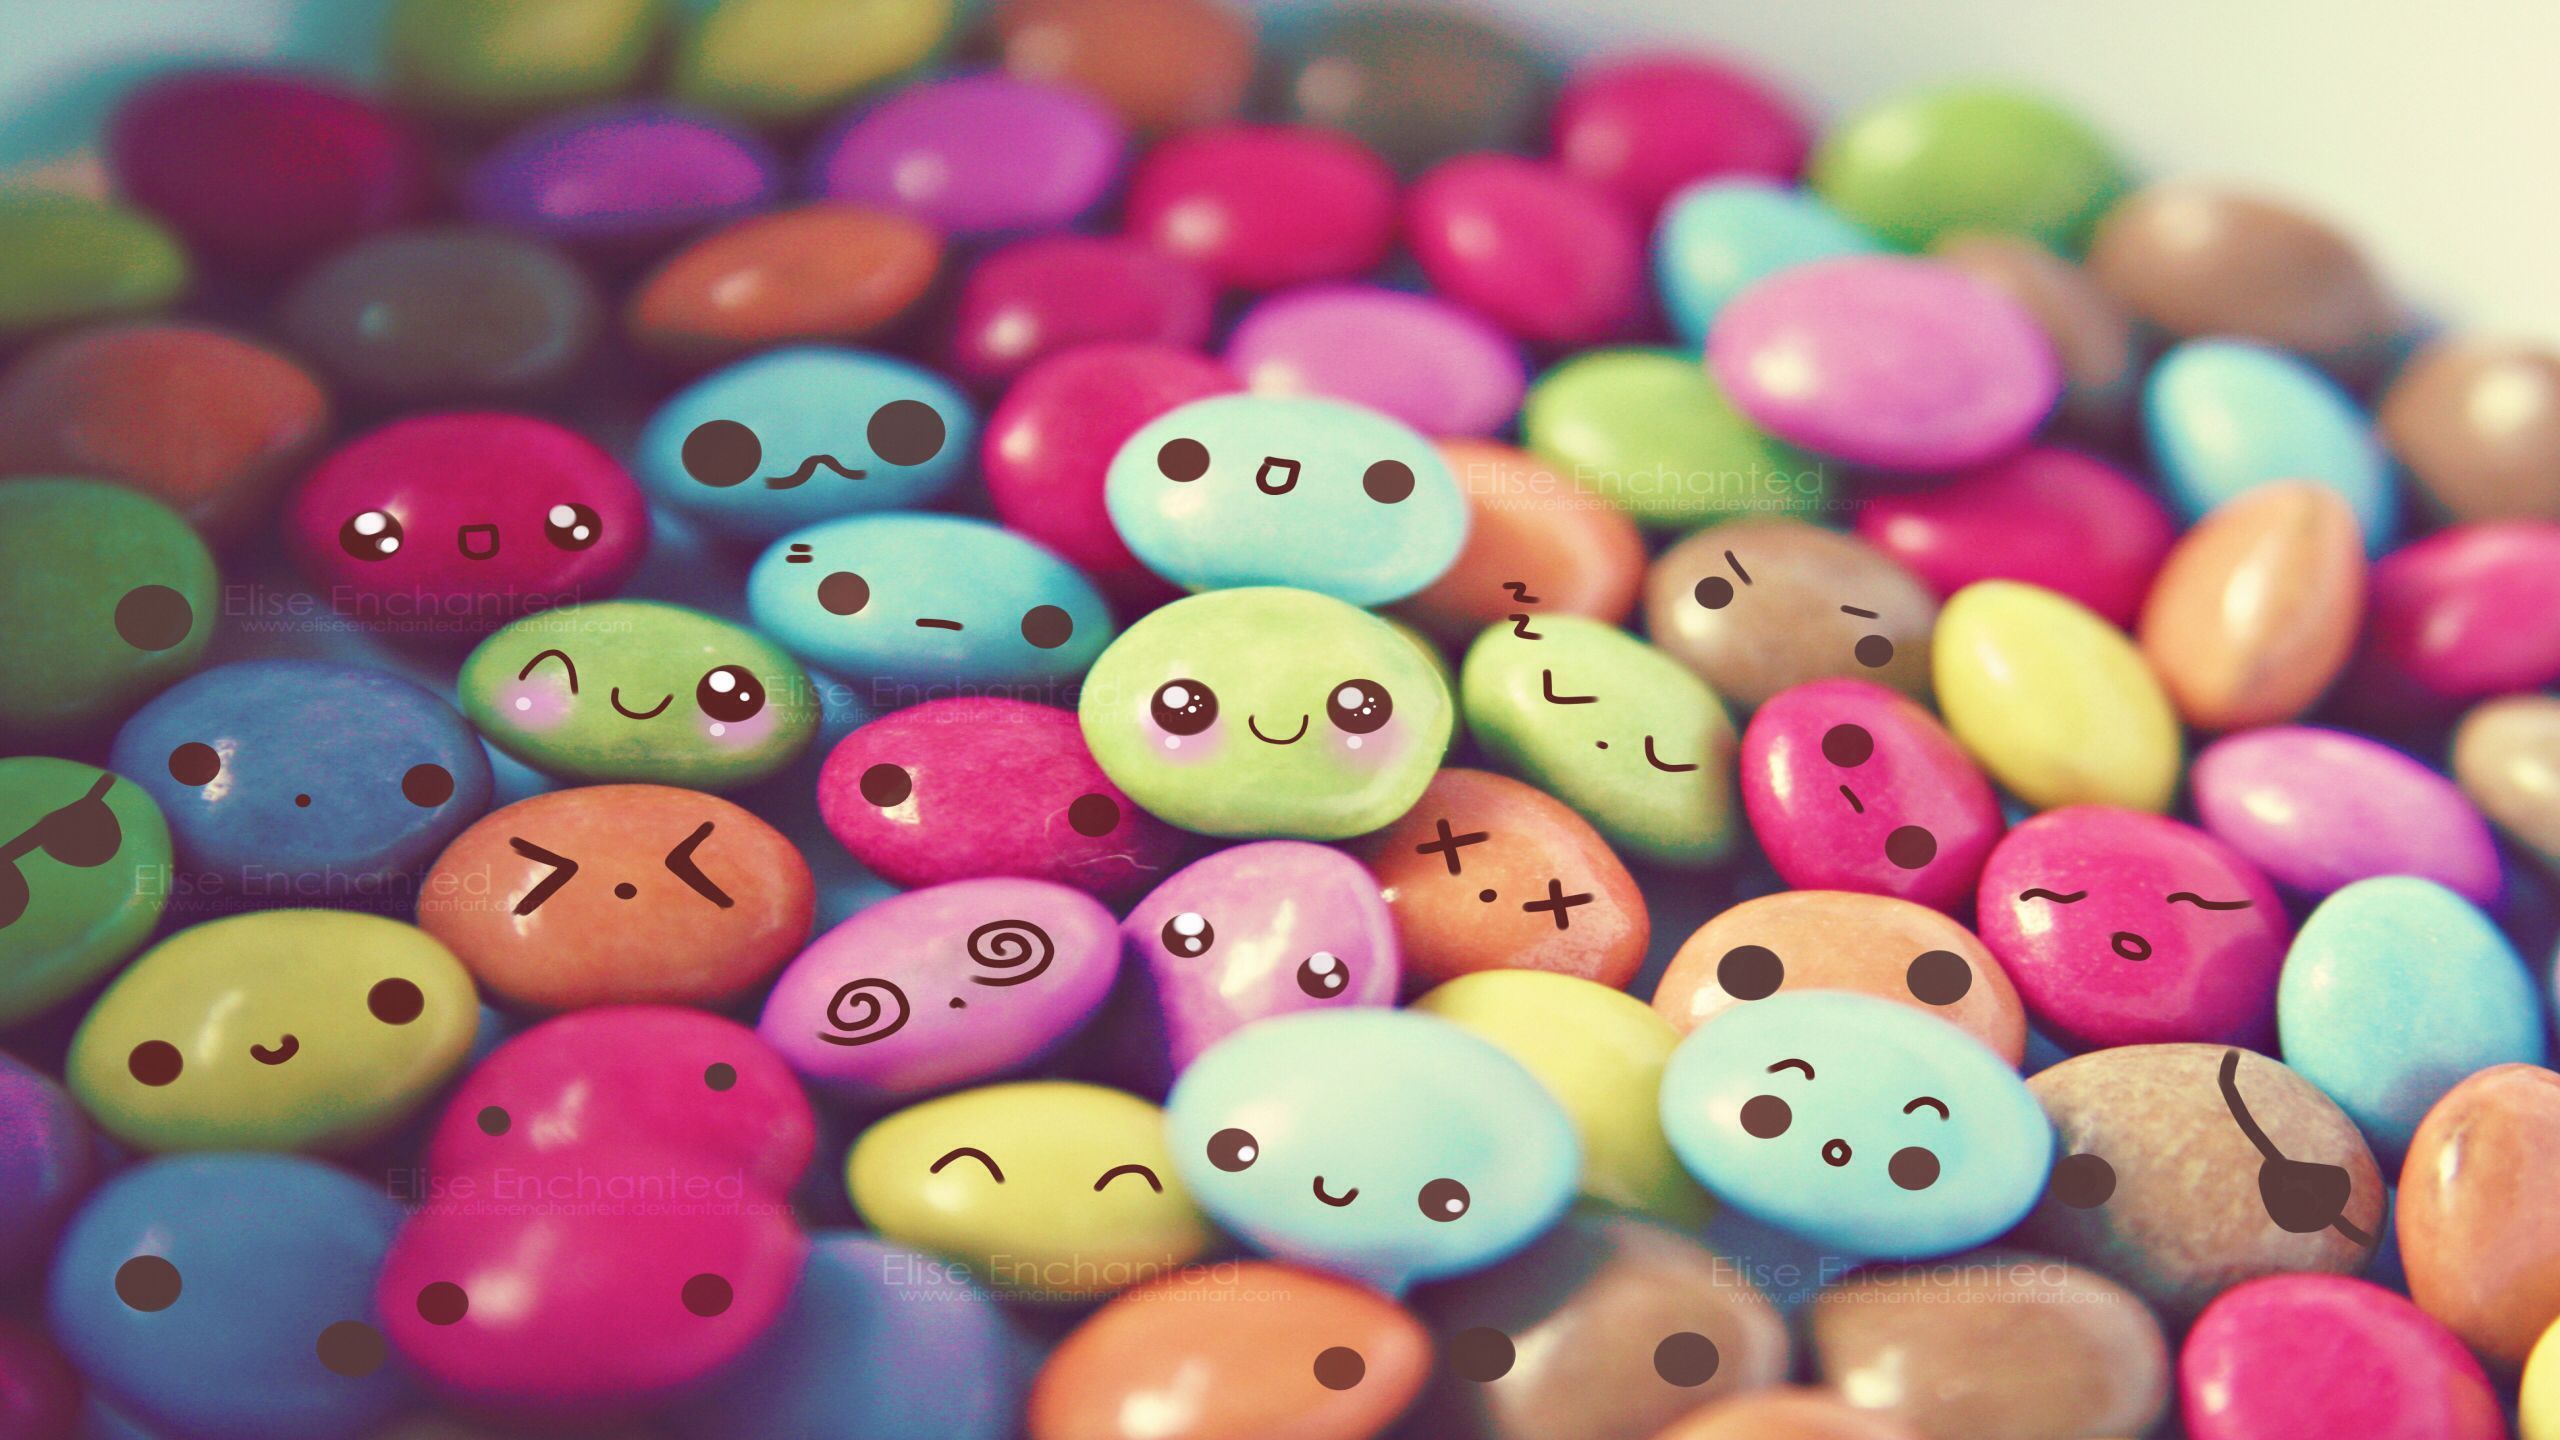 Cute Food with Faces Wallpaper Free Cute Food with Faces